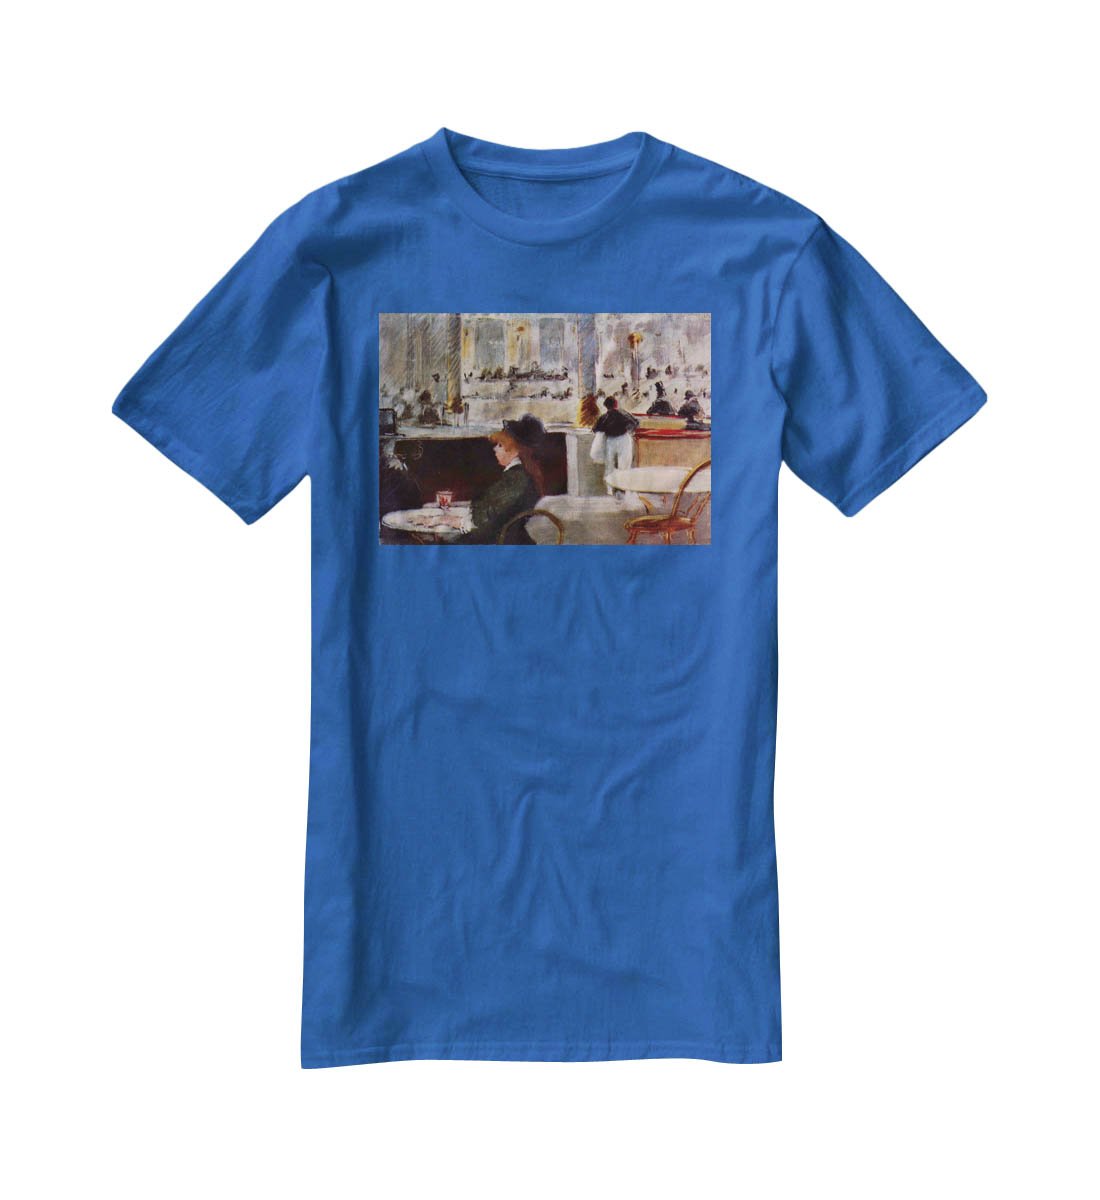 In Cafe 1 by Manet T-Shirt - Canvas Art Rocks - 2